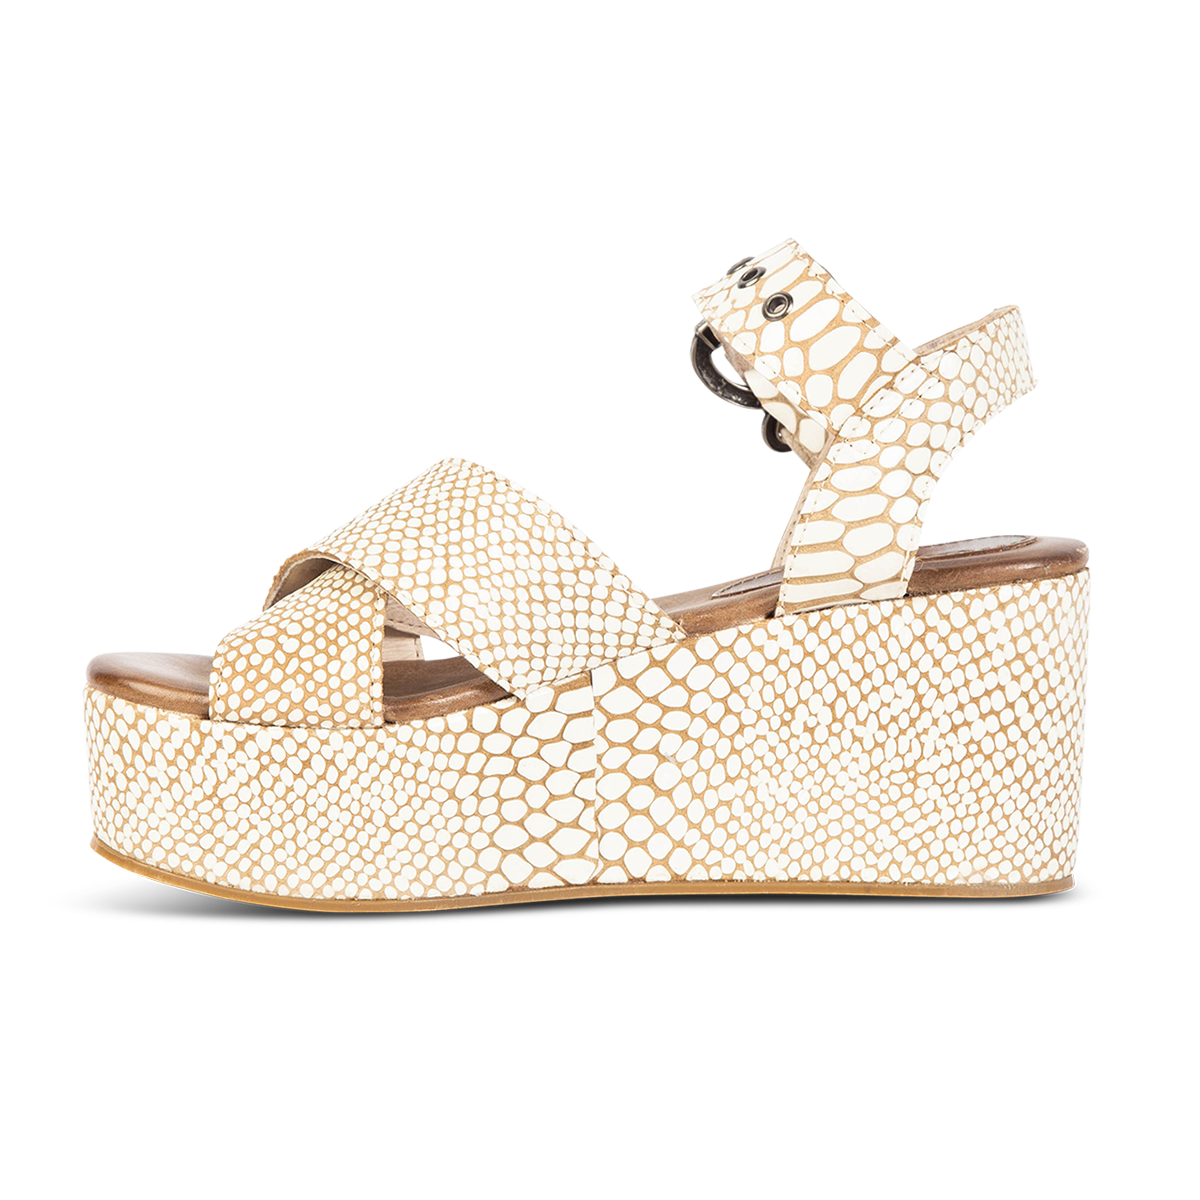 Inside view showing heel and straps on FREEBIRD women's Larae white snake wedge sandal with platform heel and an adjustable ankle strap